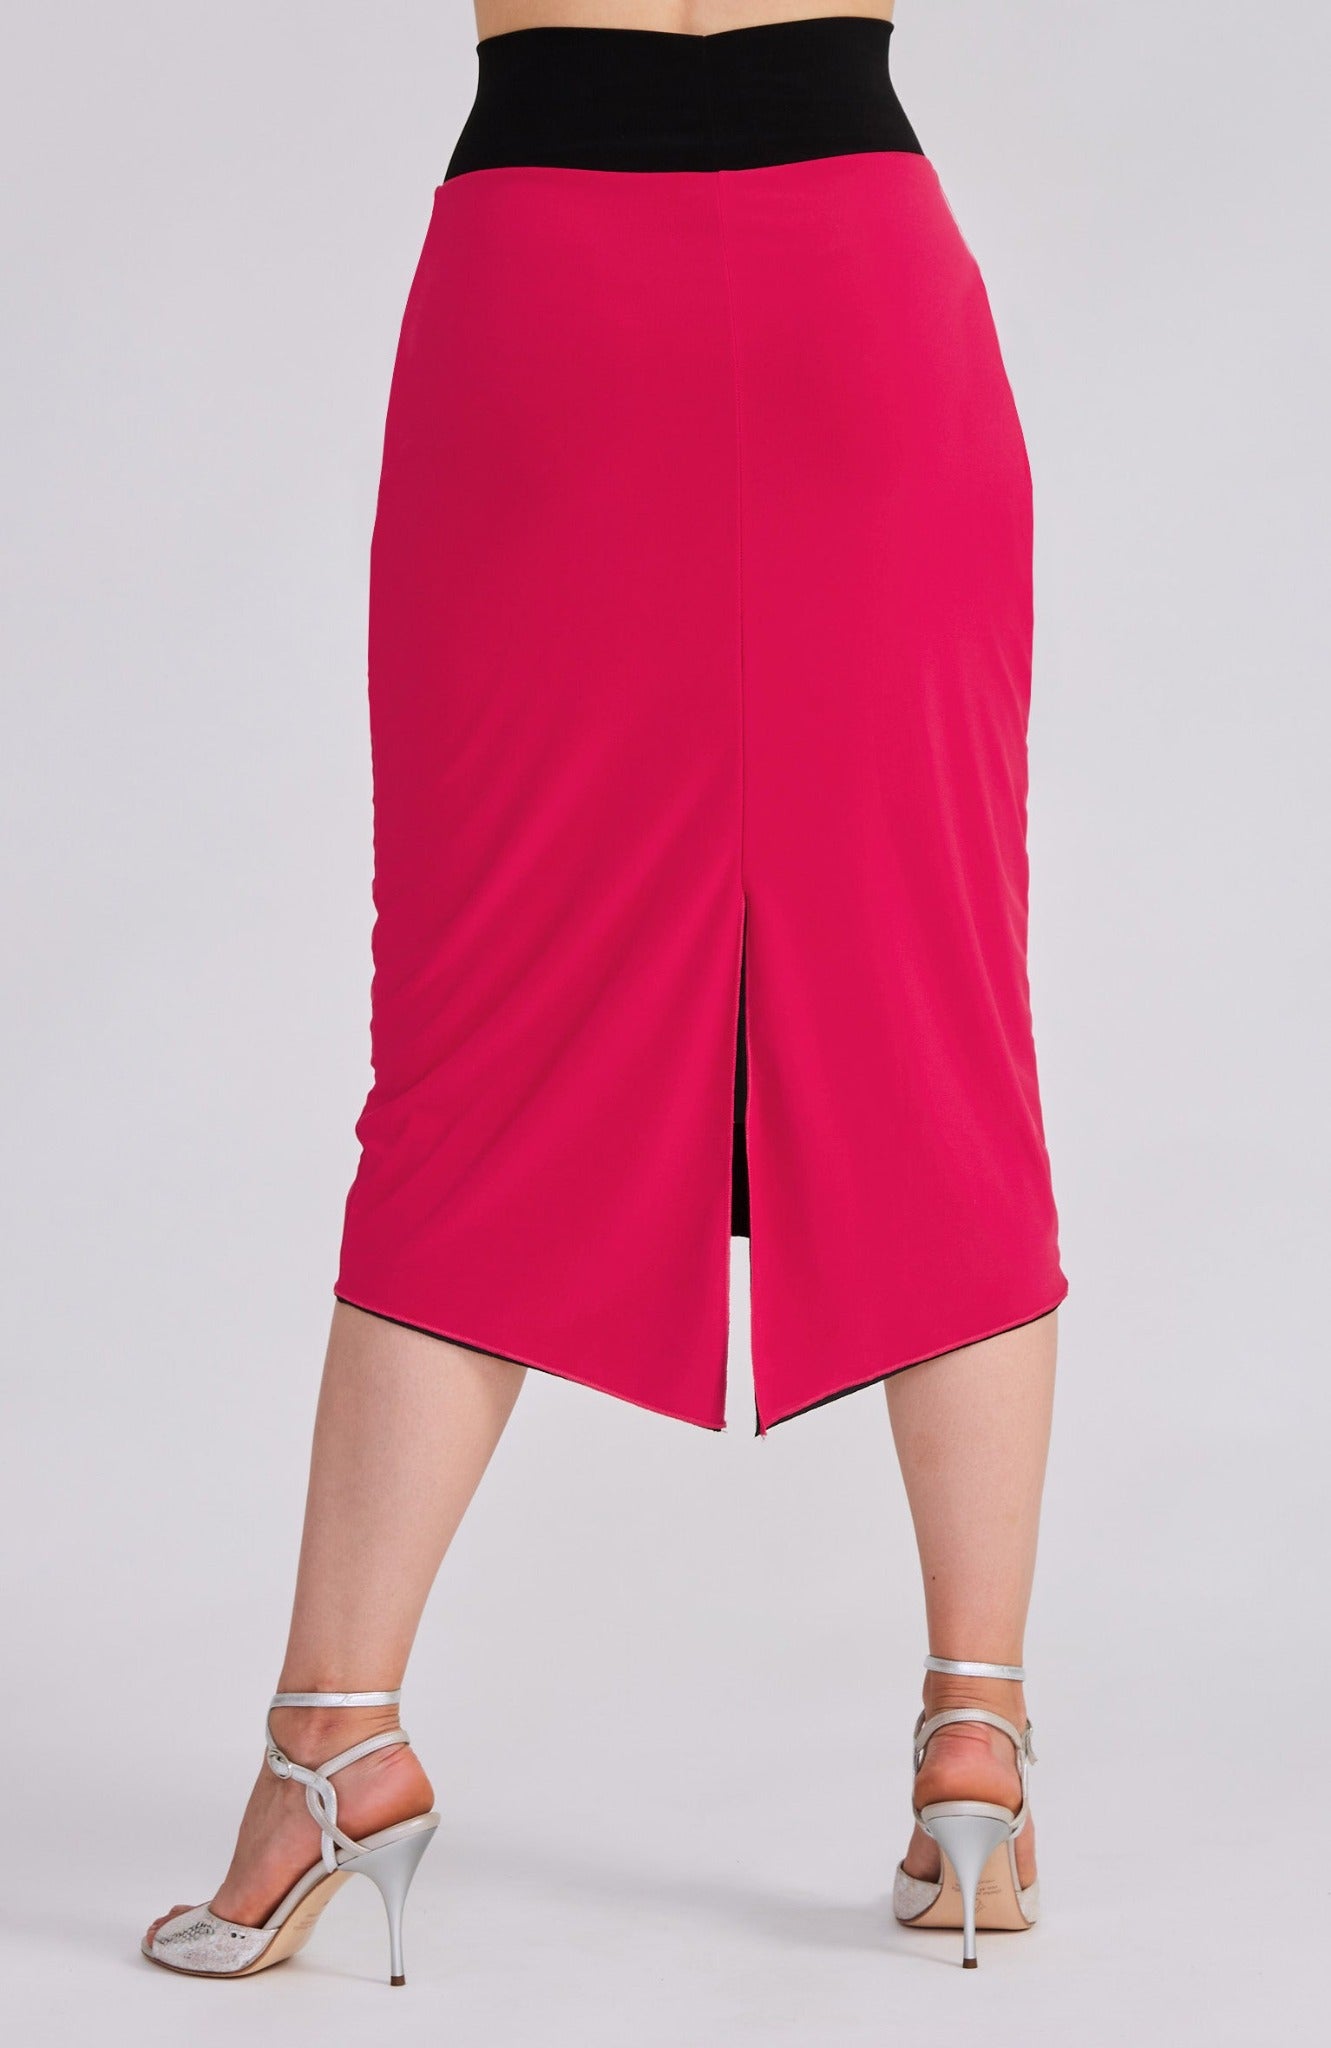 argentine tango skirt in pink with back slit